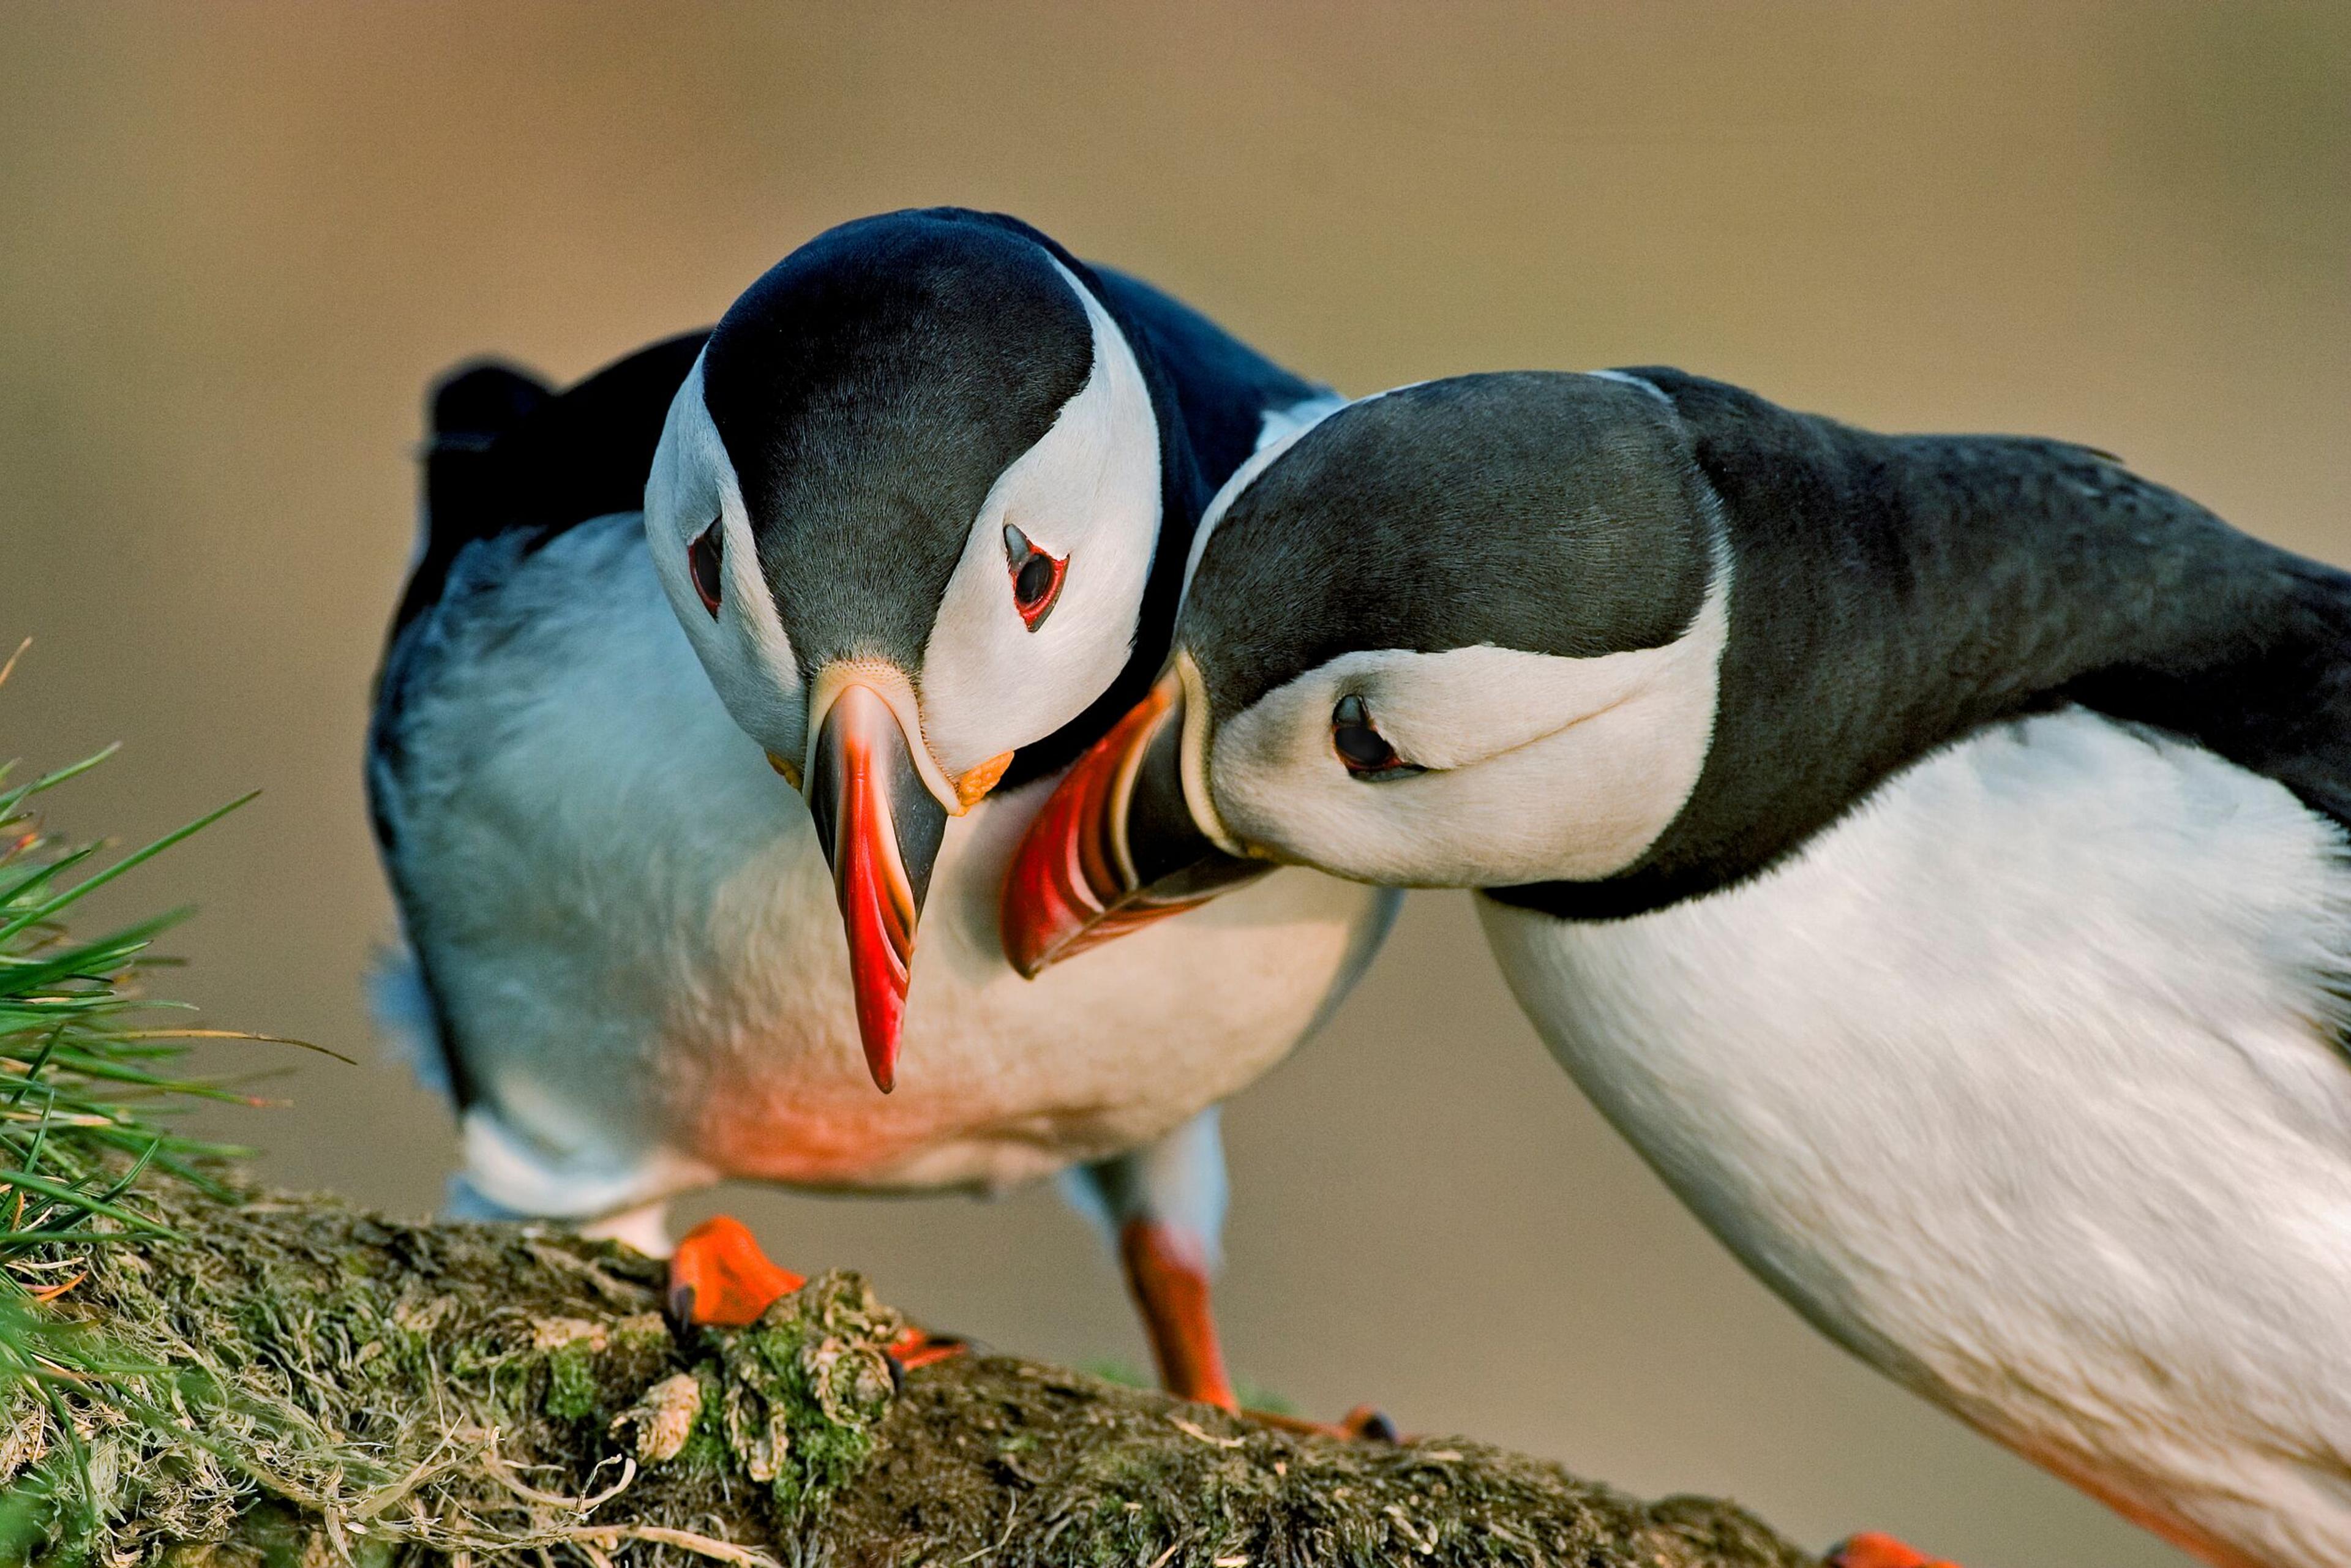 Puffins nesting at Dýrhólaey in the South Coast of Iceland.